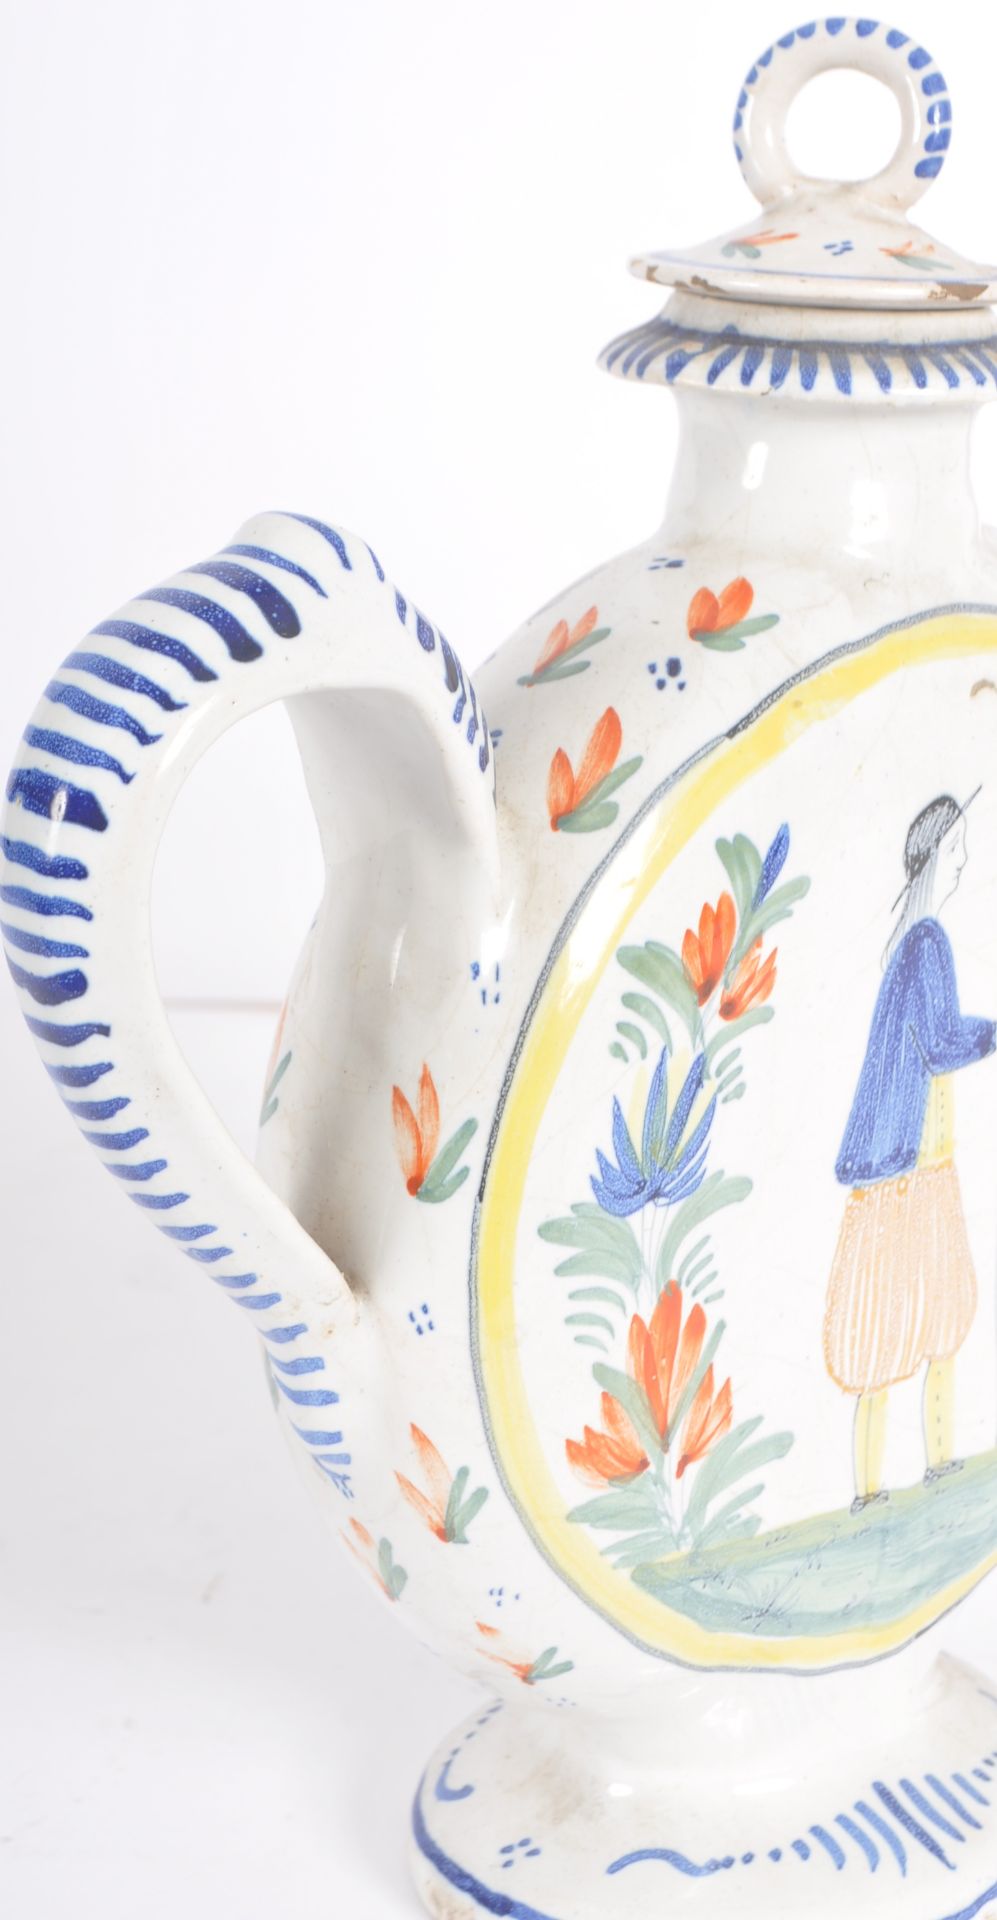 19TH CENTURY FRENCH FAIENCE TEAPOT - Image 10 of 13